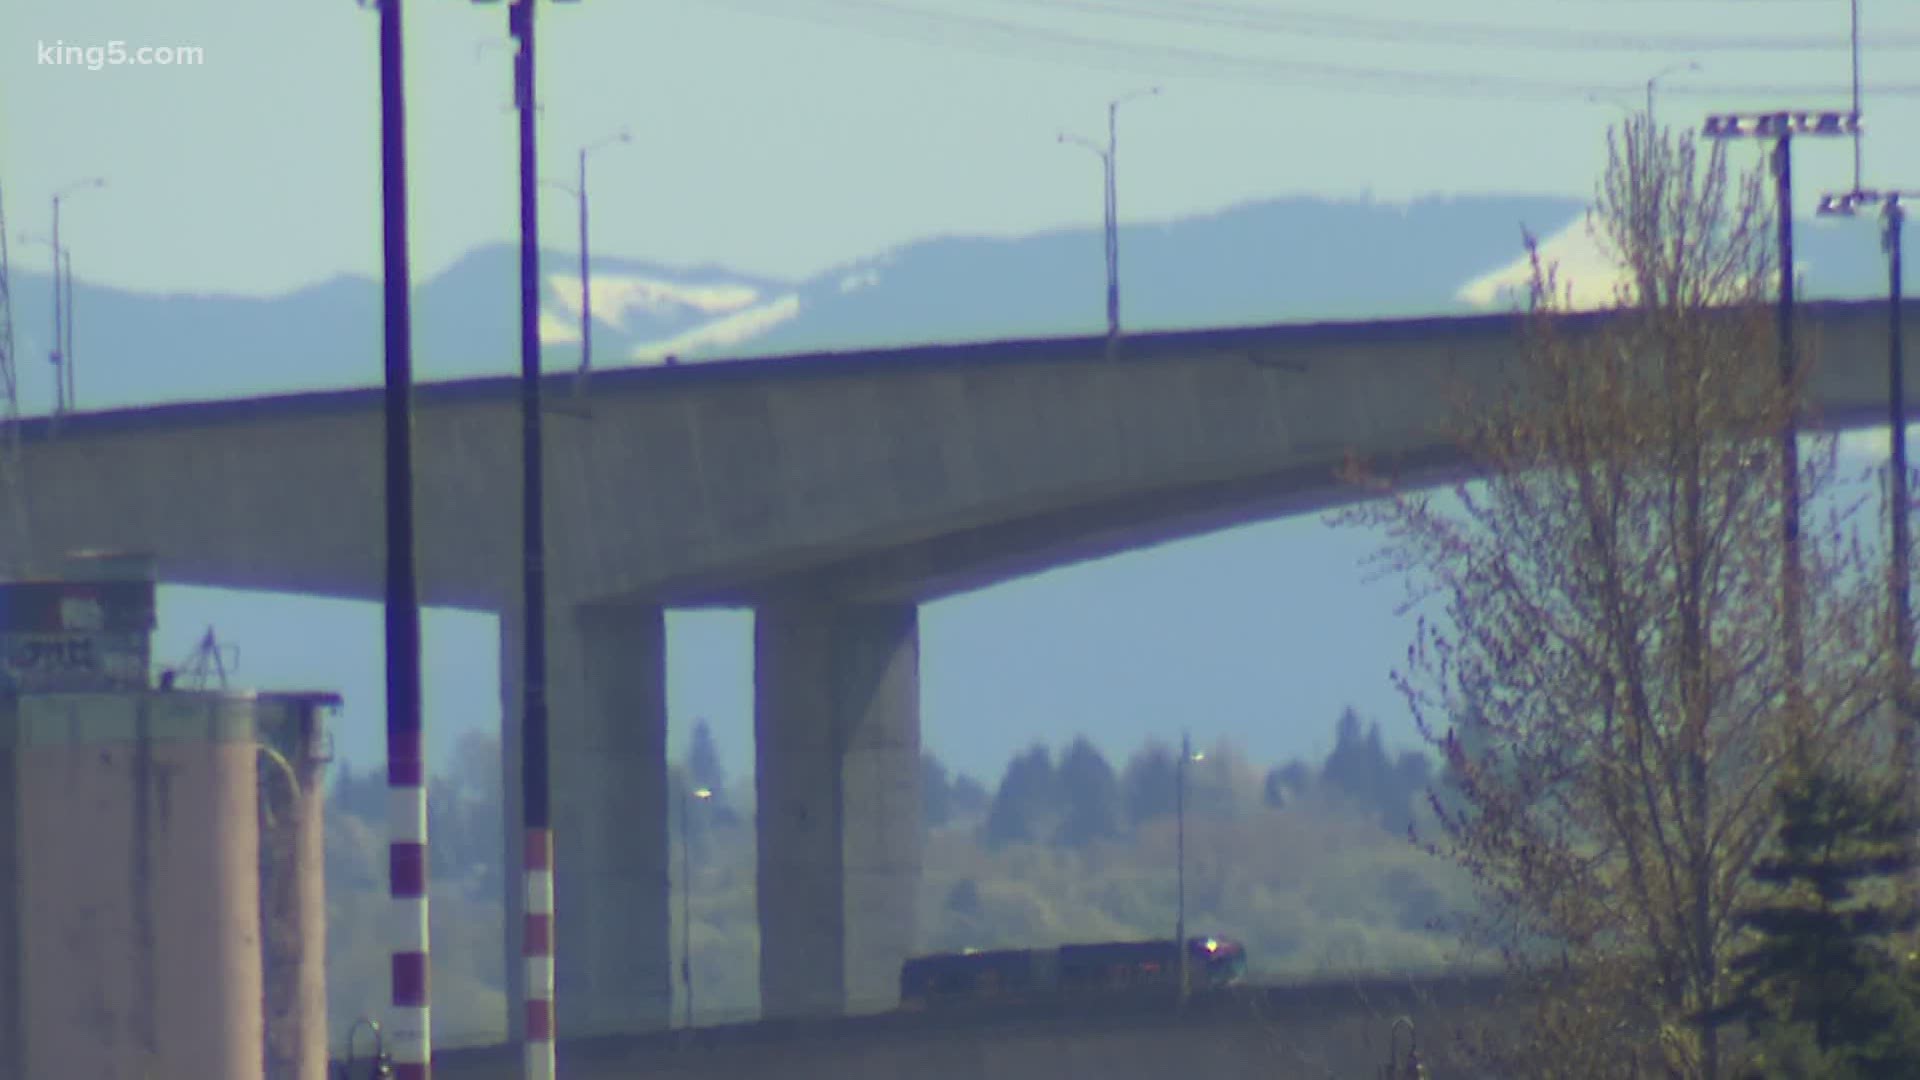 Seattle Mayor Jenny Durkan is suggesting a planned ST3 light rail line could be used to help replace the now cracked and closed West Seattle Bridge.